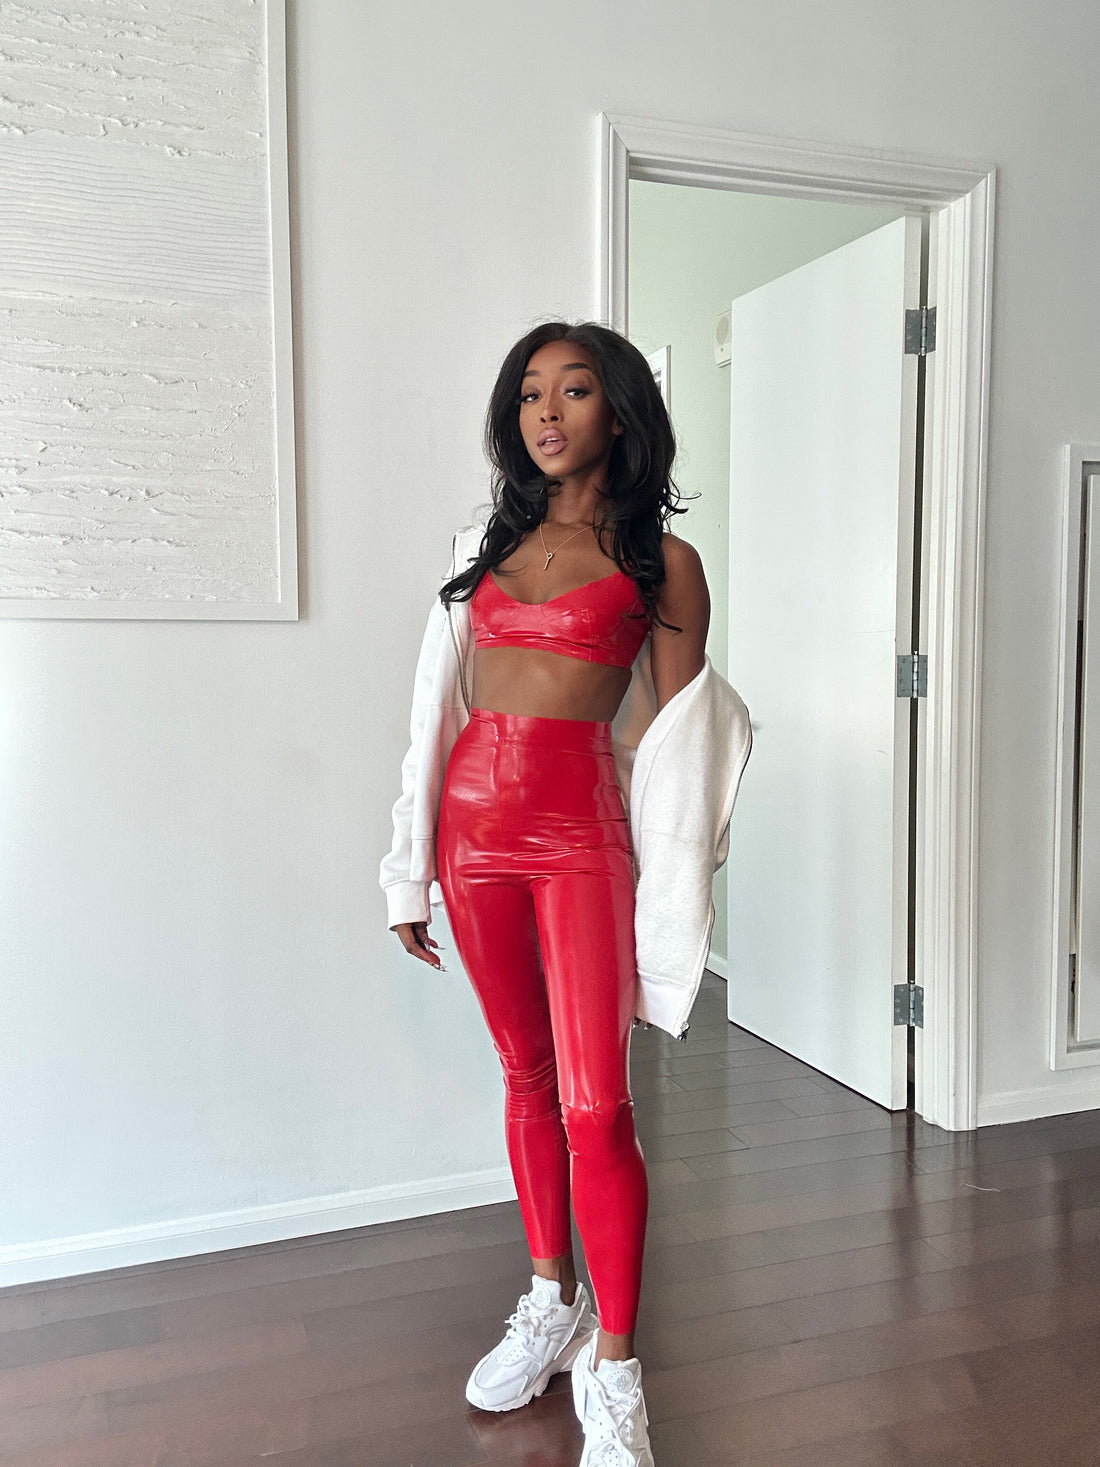 Jheanelle in a stylish two-piece red latex outfit with a hoodie, exuding a confident and sporty allure